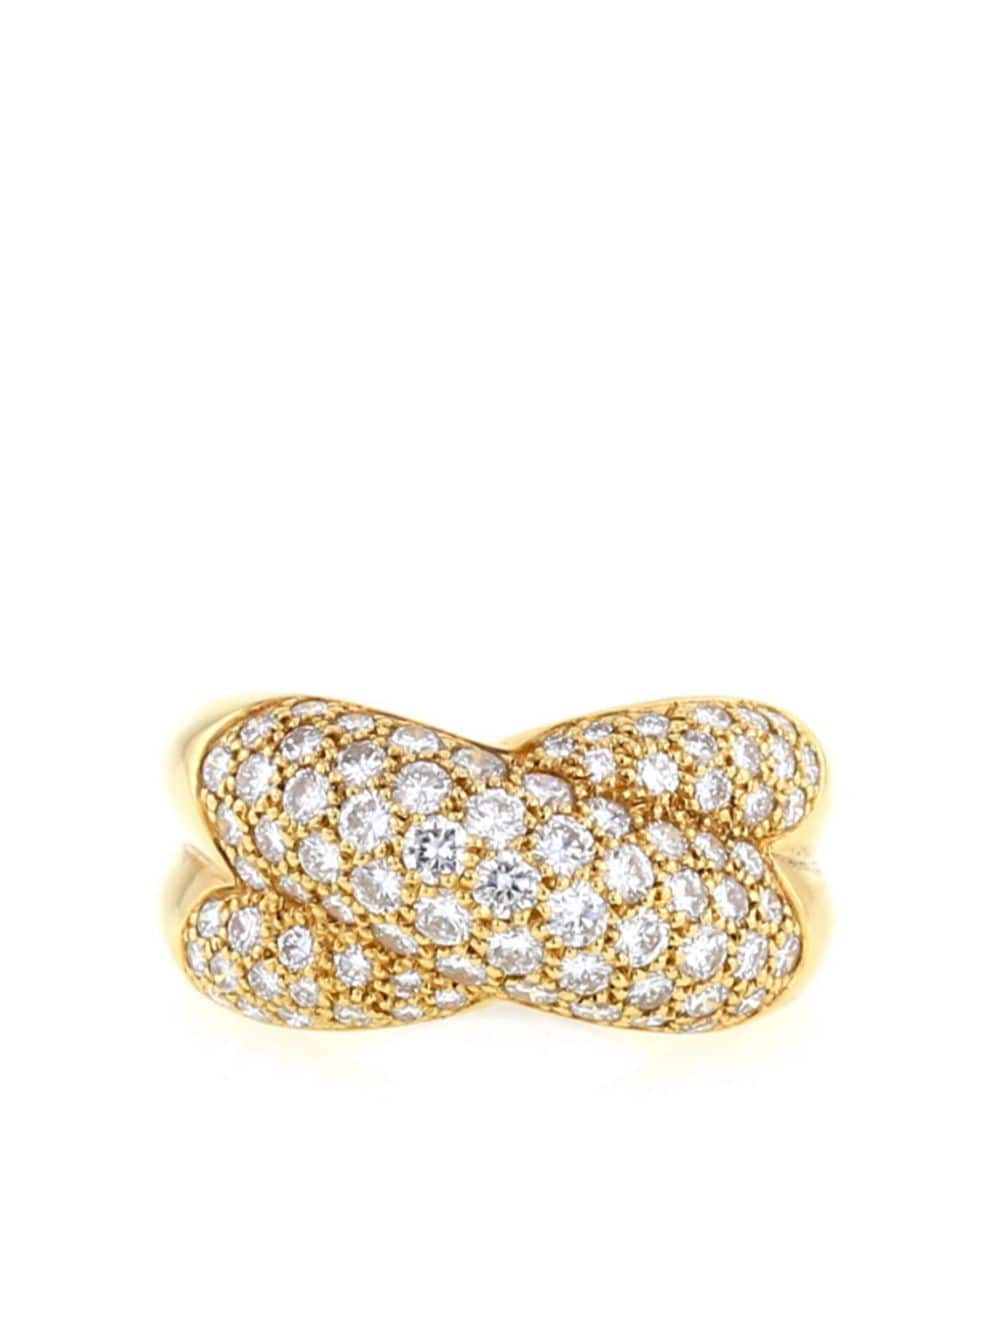 Pre-owned Cartier 1996 Yellow Gold Colisée Diamond Ring